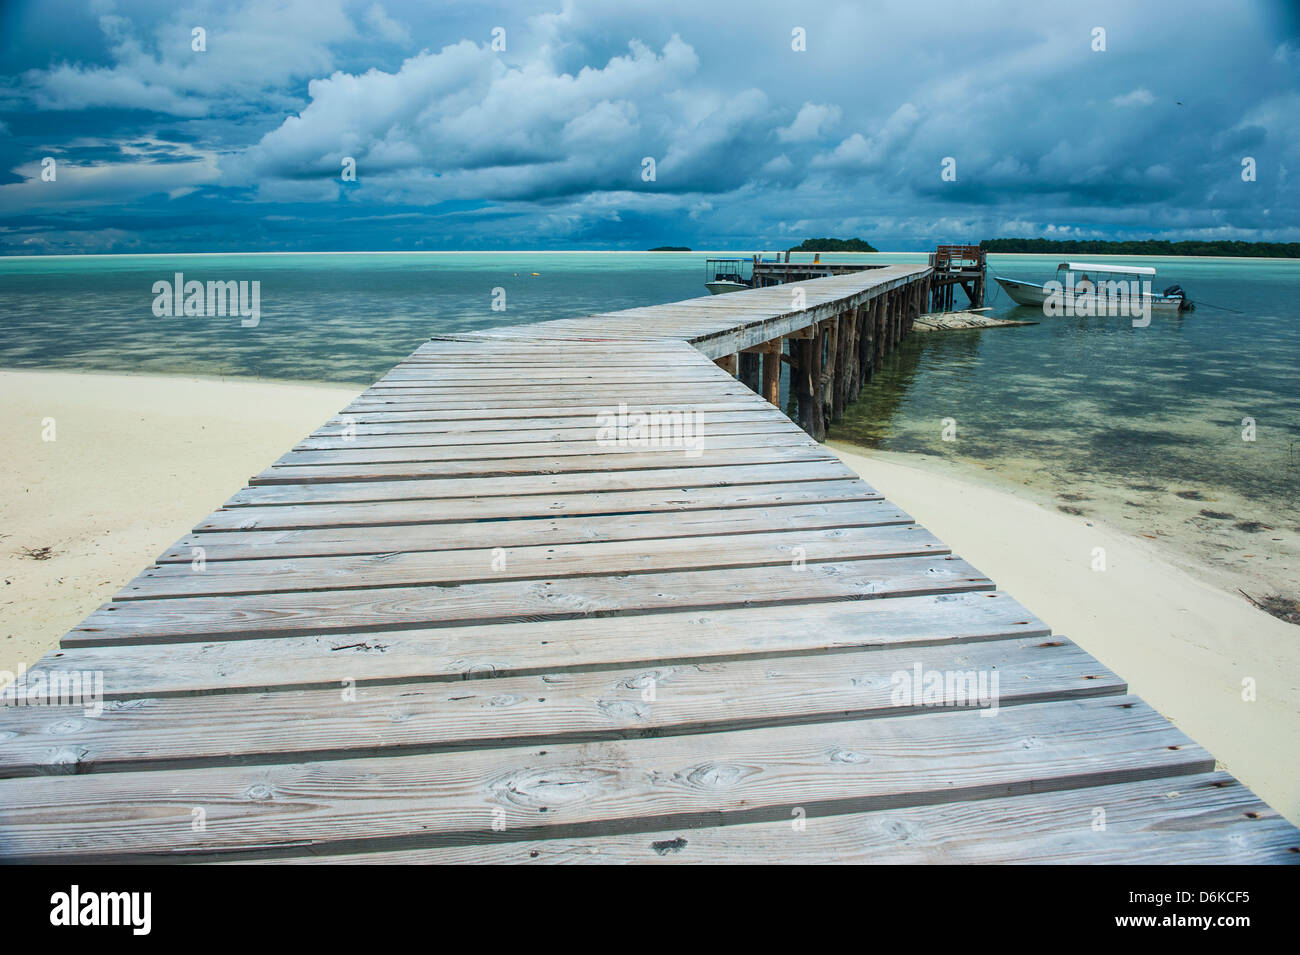 Boat pier on Carp island, one of the Rock islands, Palau, Central Pacific, Pacific Stock Photo